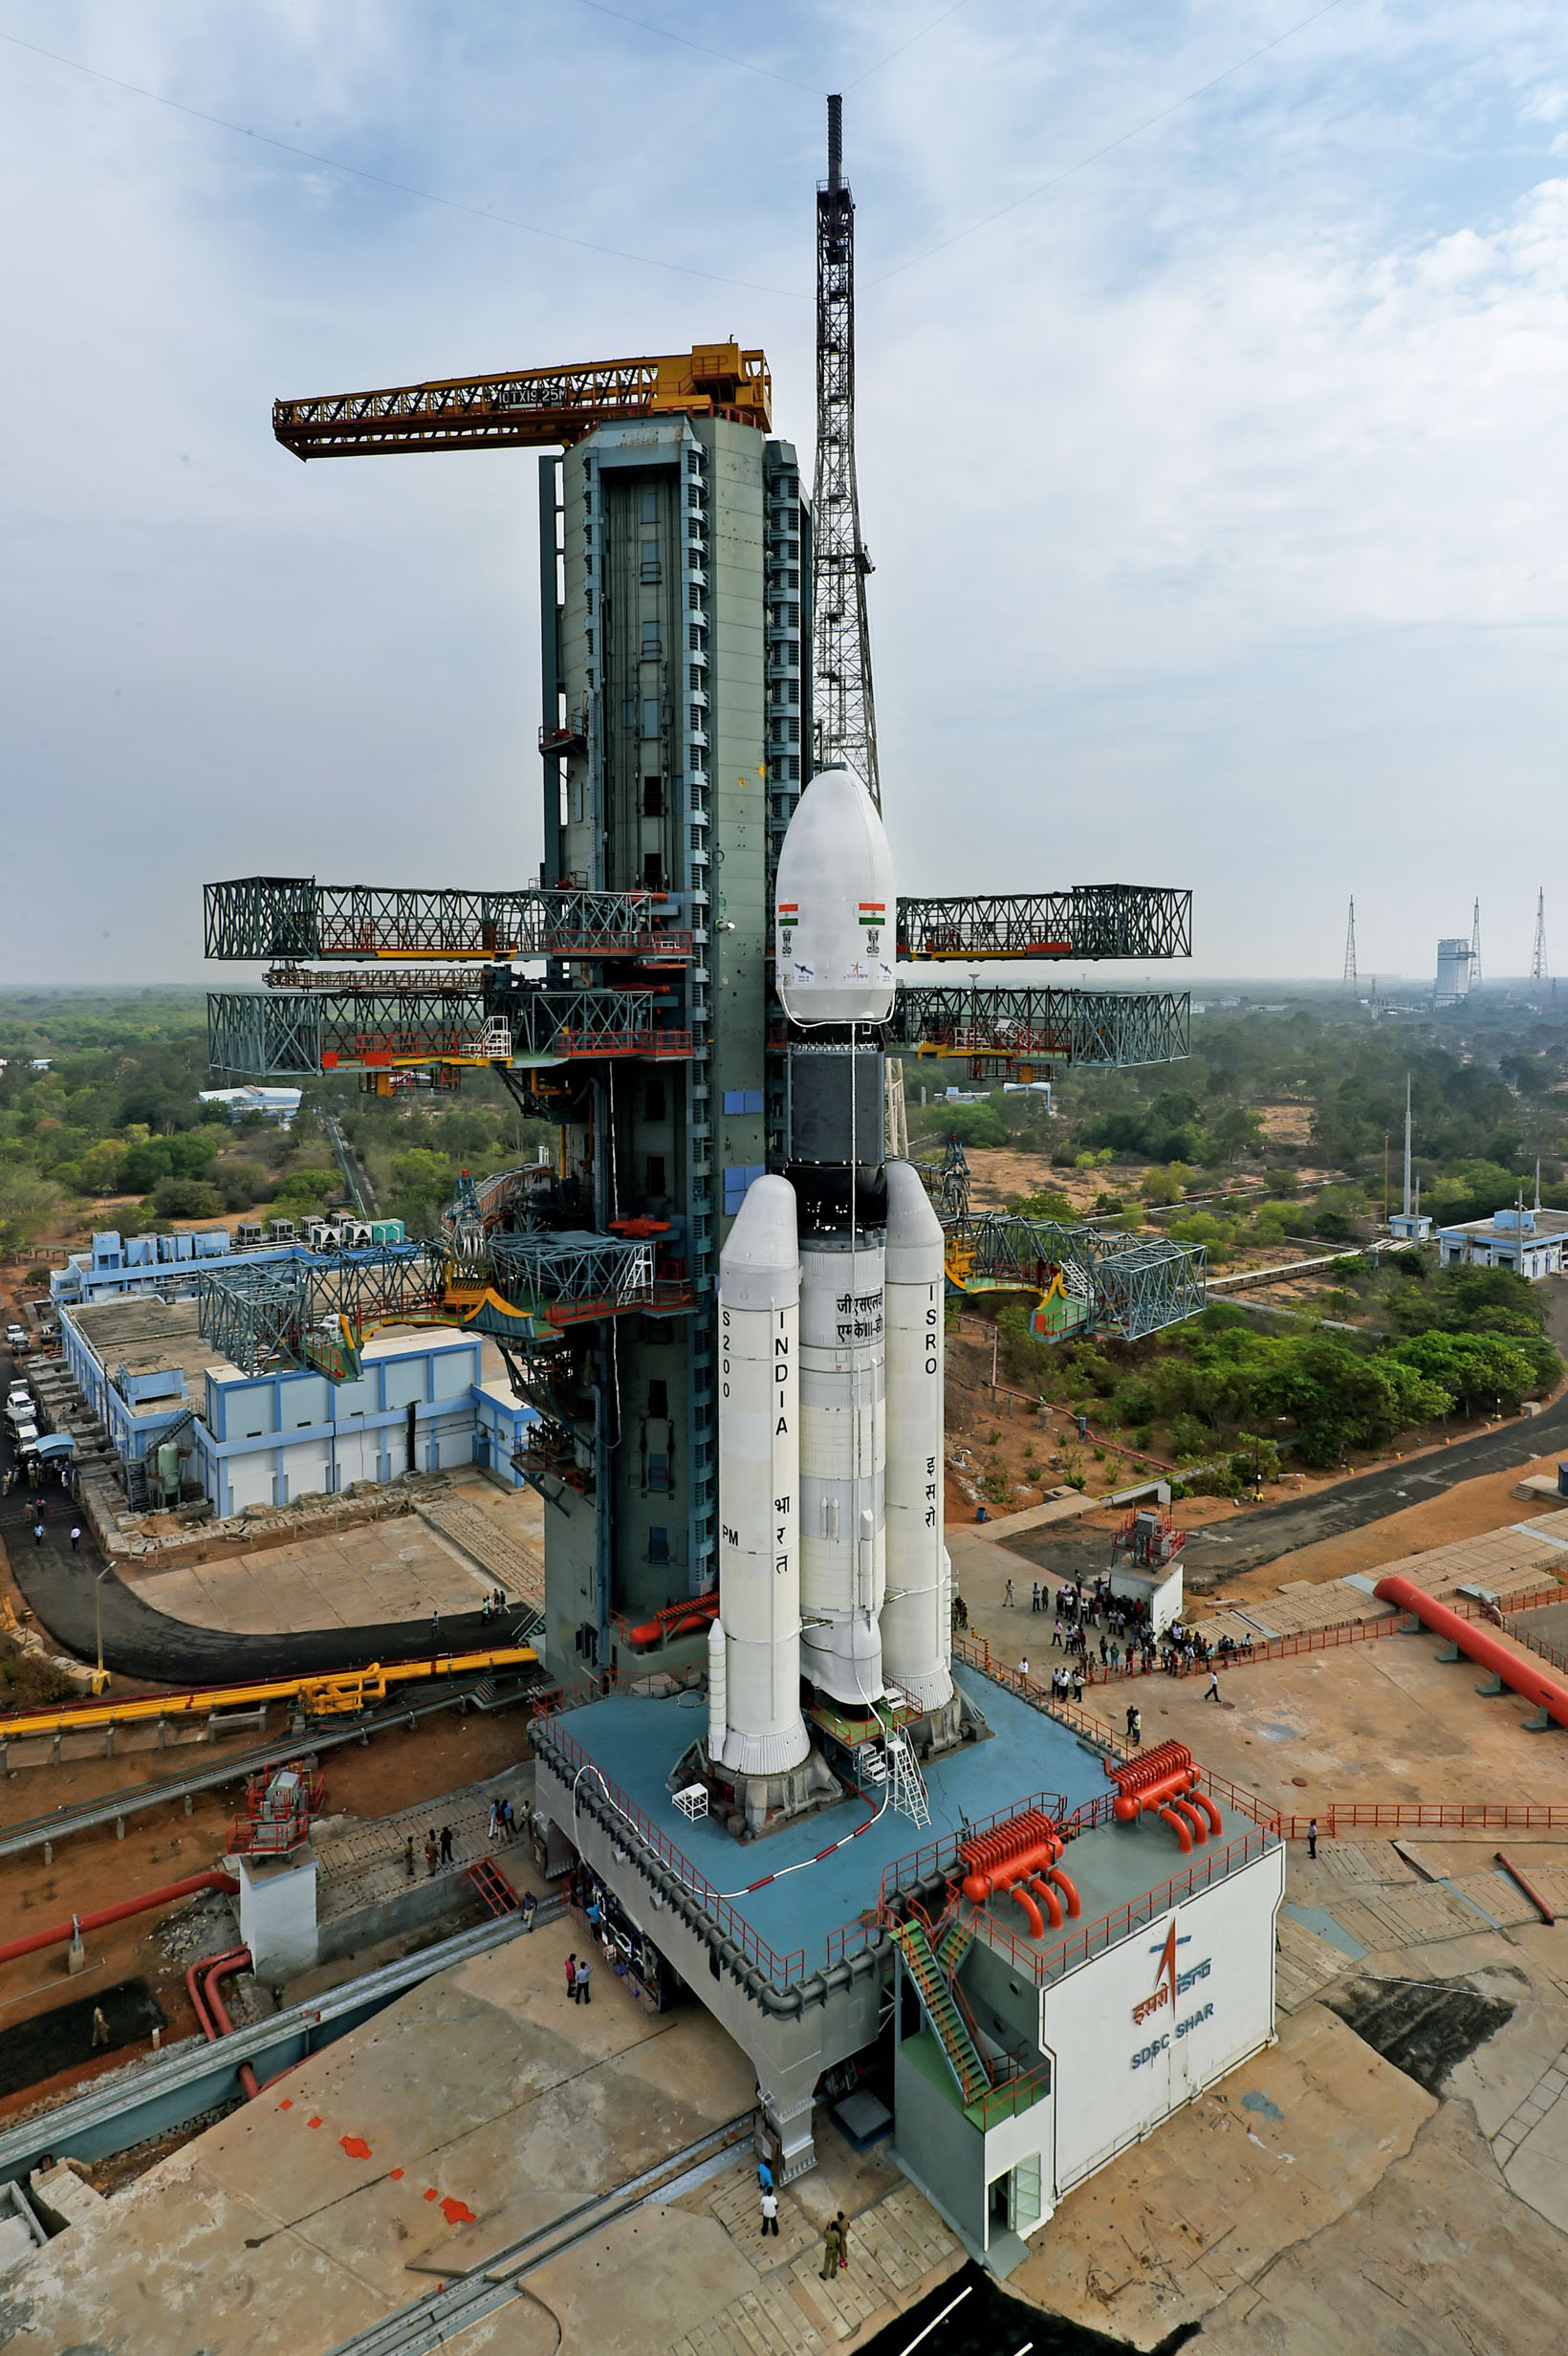 India Just Launched Its Giant ‘Monster’ Rocket